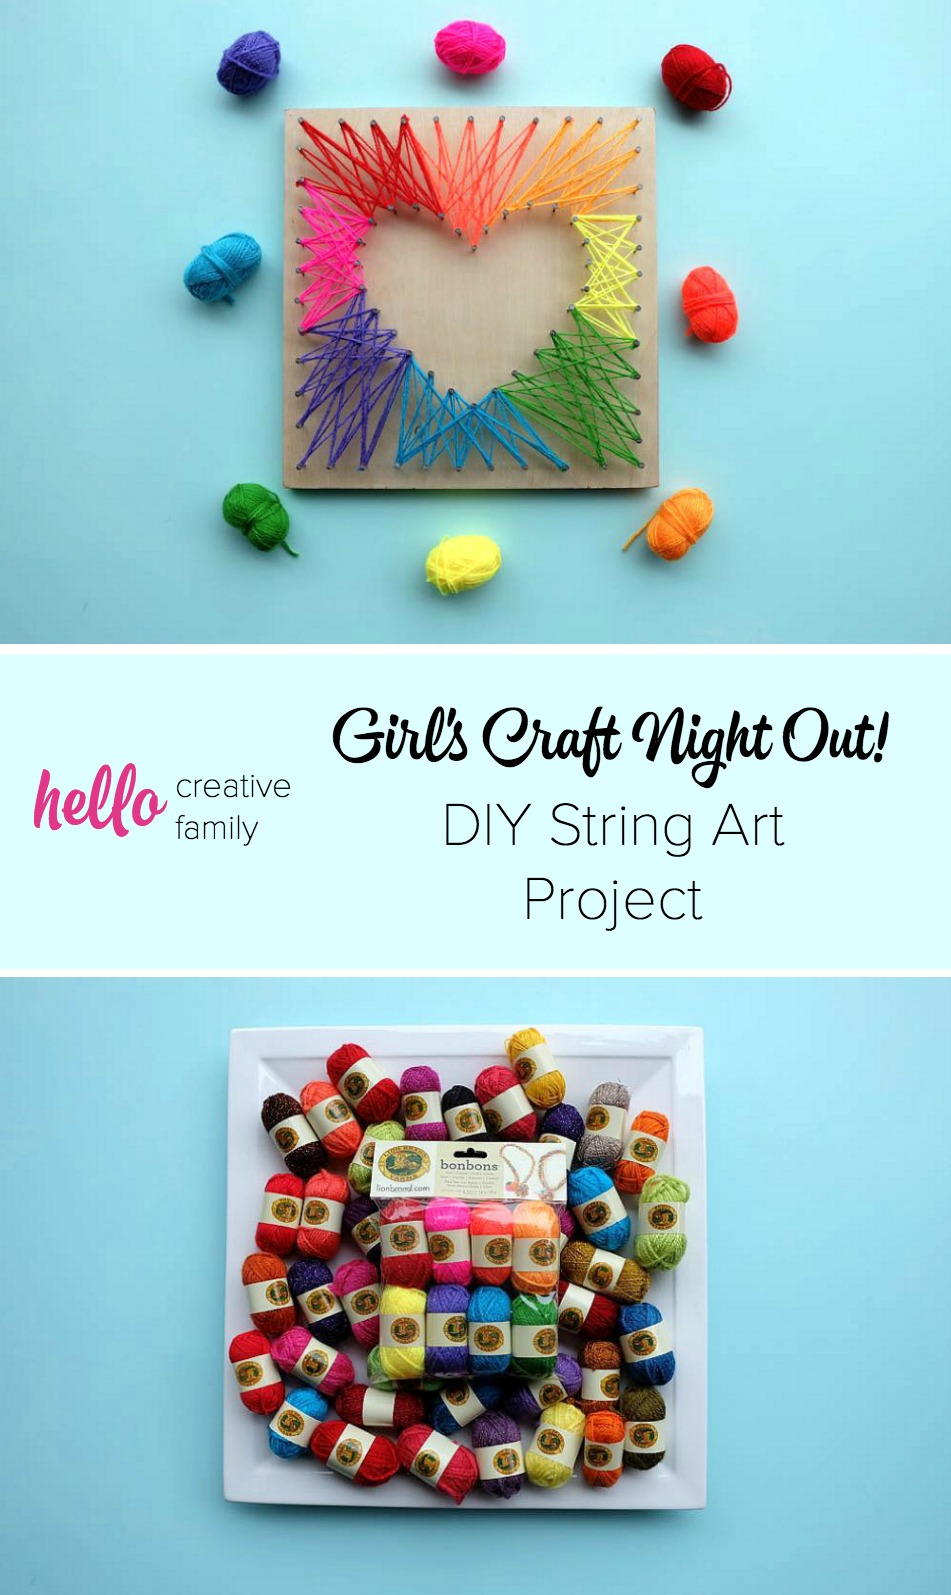 Get a group of girlfriends together for a craft night and try this easy DIY project! Make your own string art with these easy instructions.